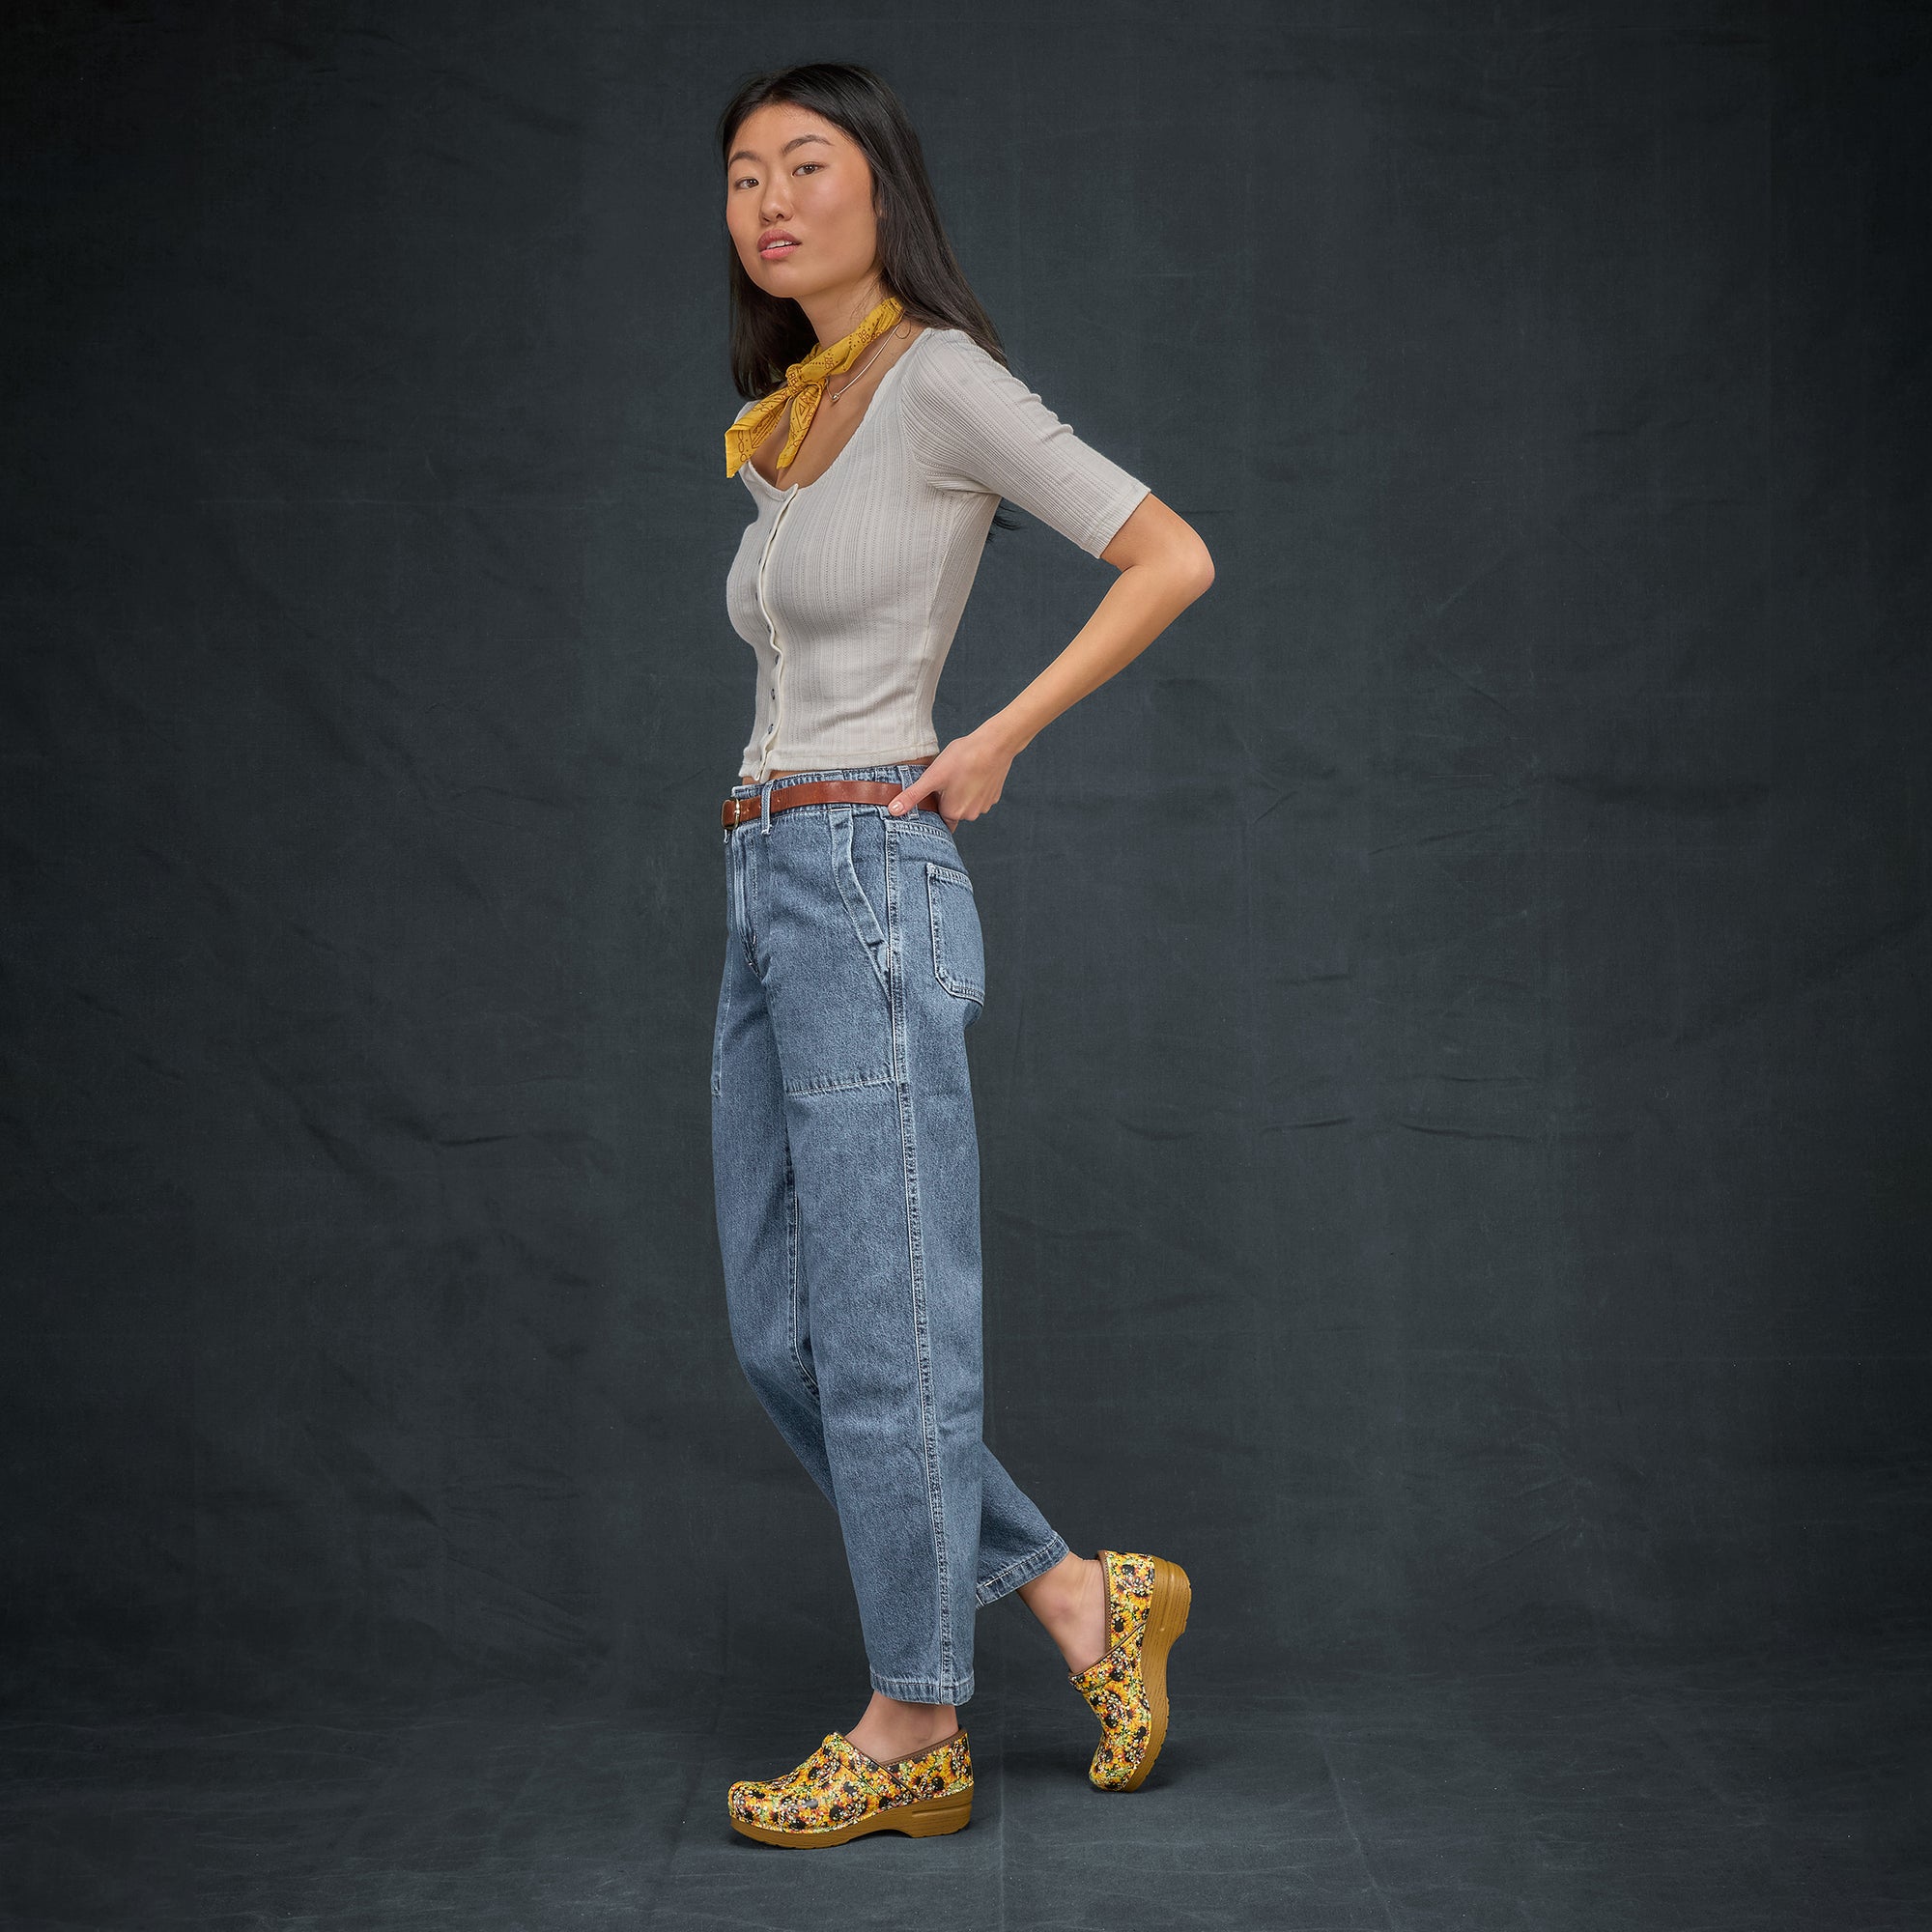 Woman in casual attire wearing bright, sunflower printed clogs.